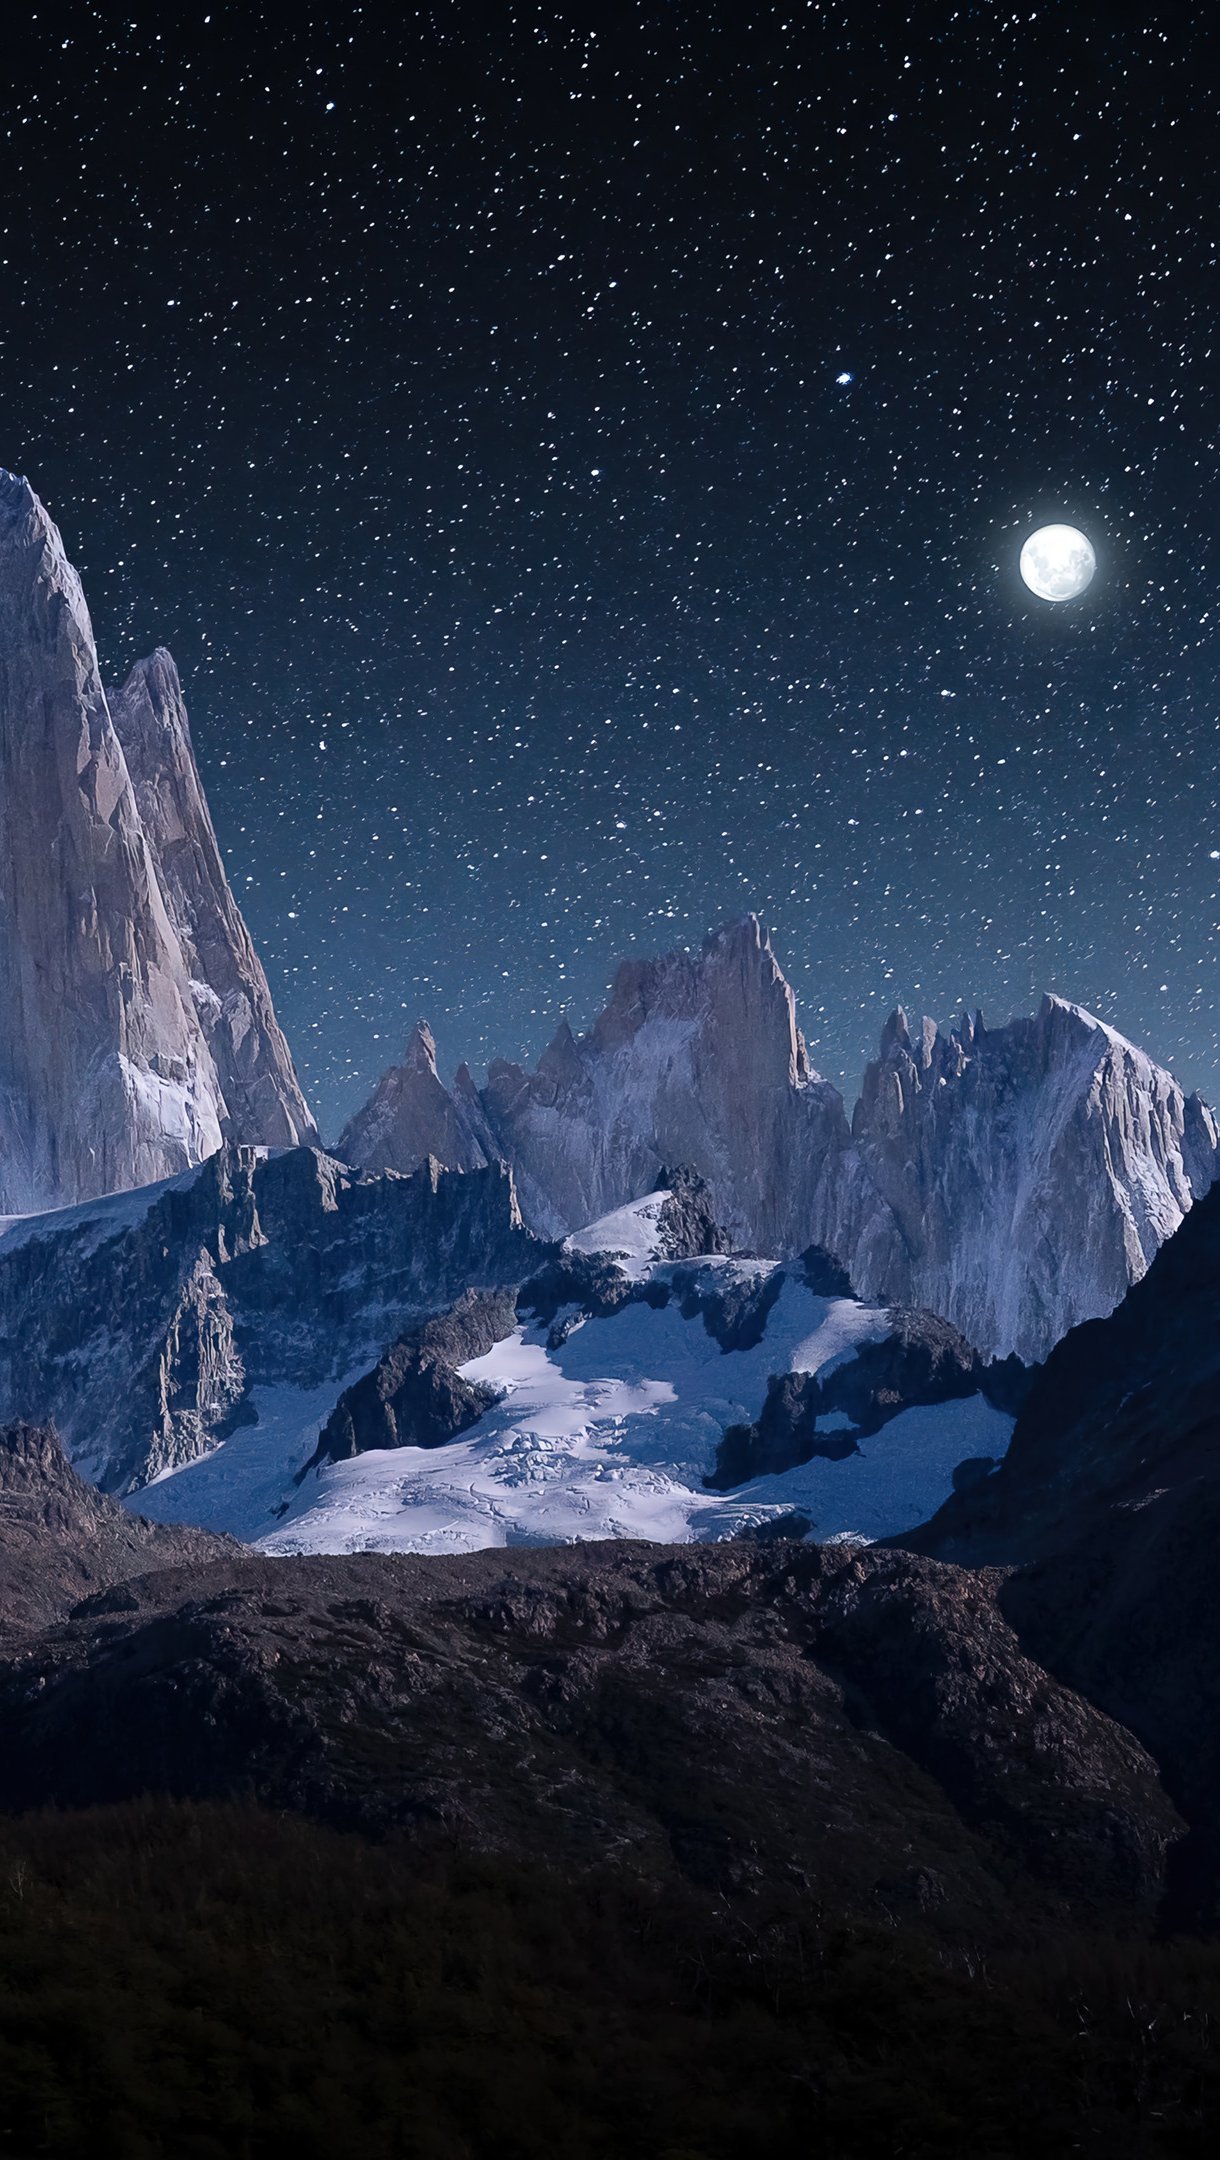 Night in the mountains Wallpaper 4k Ultra HD ID:11076